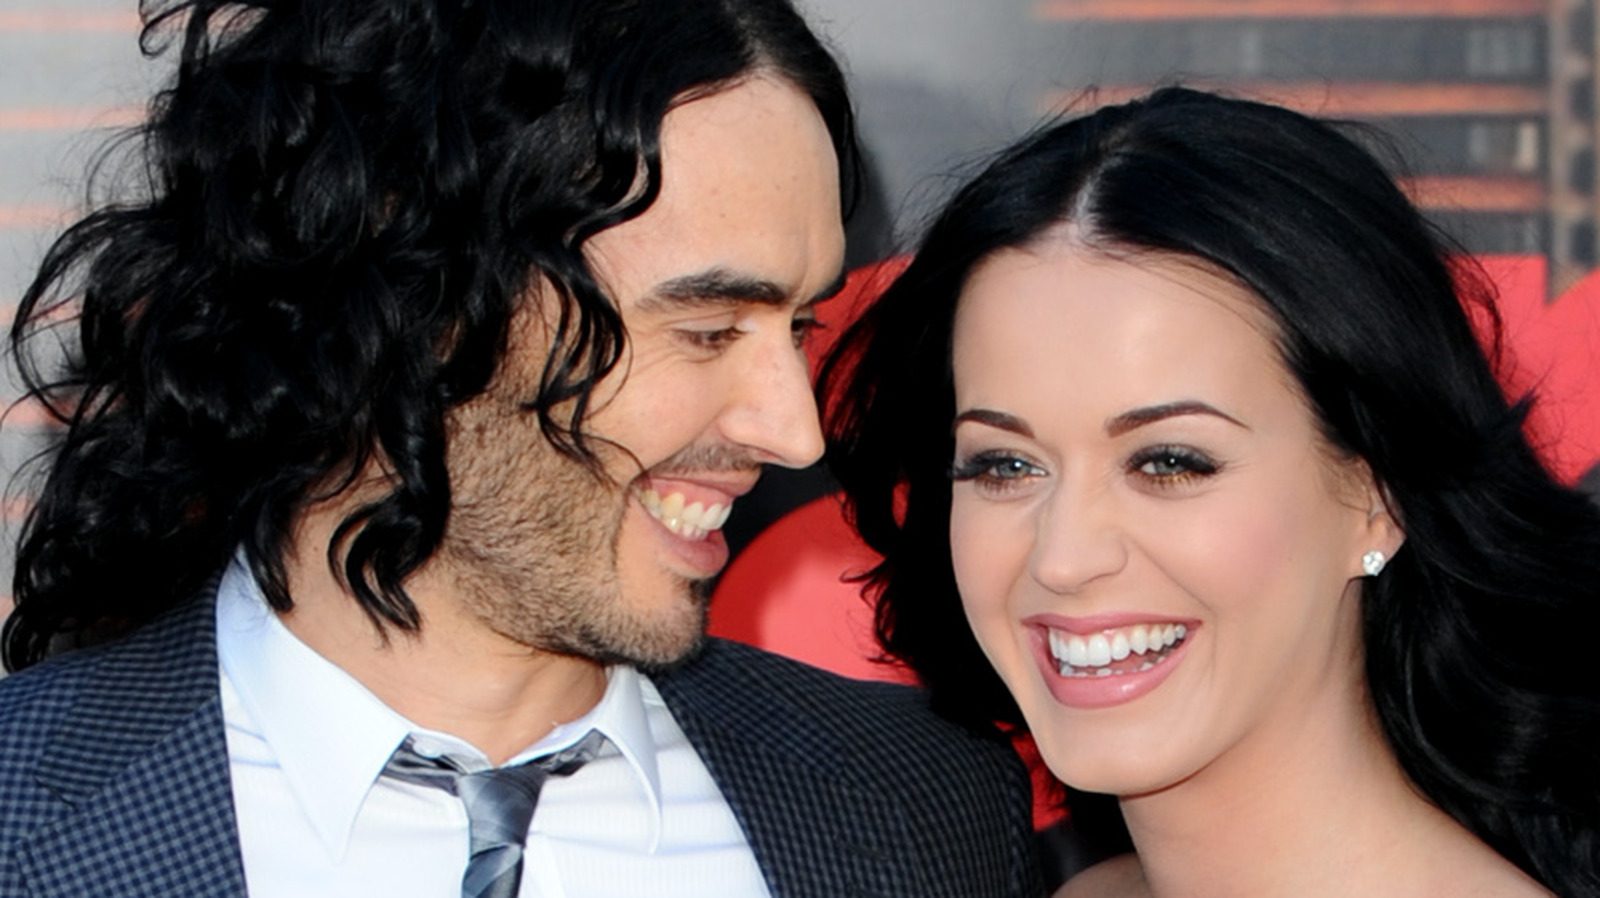 What Could Have Caused Russell Brand and Katy Perry's Divorce?